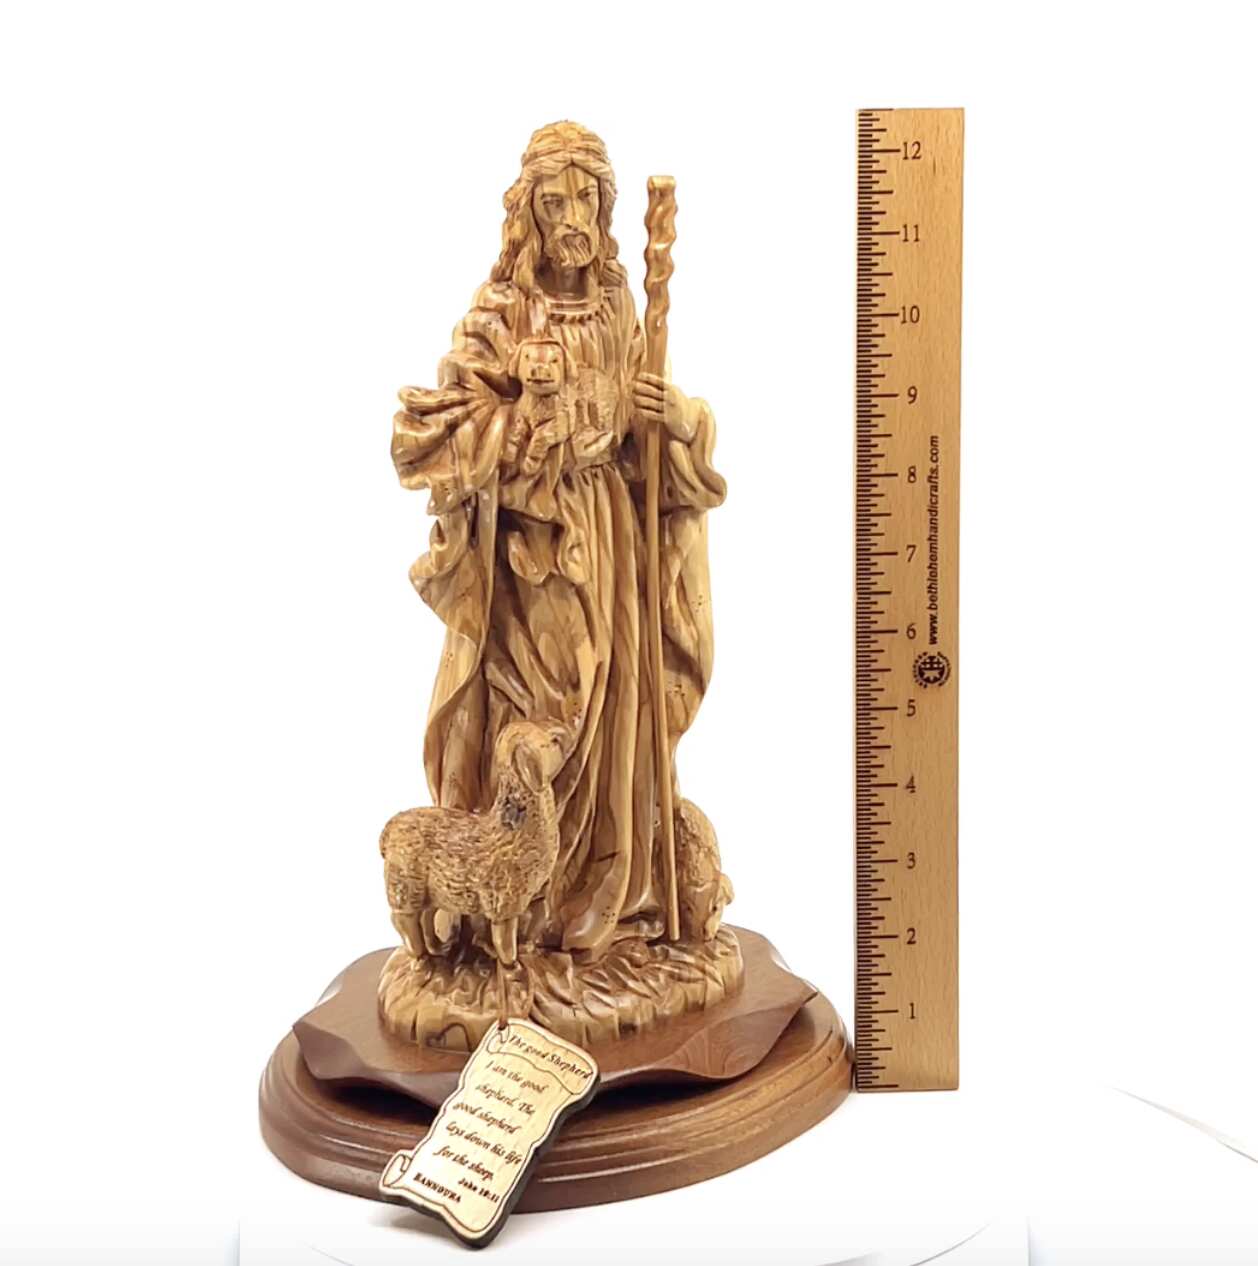 Jesus Christ "The Good Shepherd" Statue, 12.6" Carved from Holy Land Olive Wood in Bethlehem